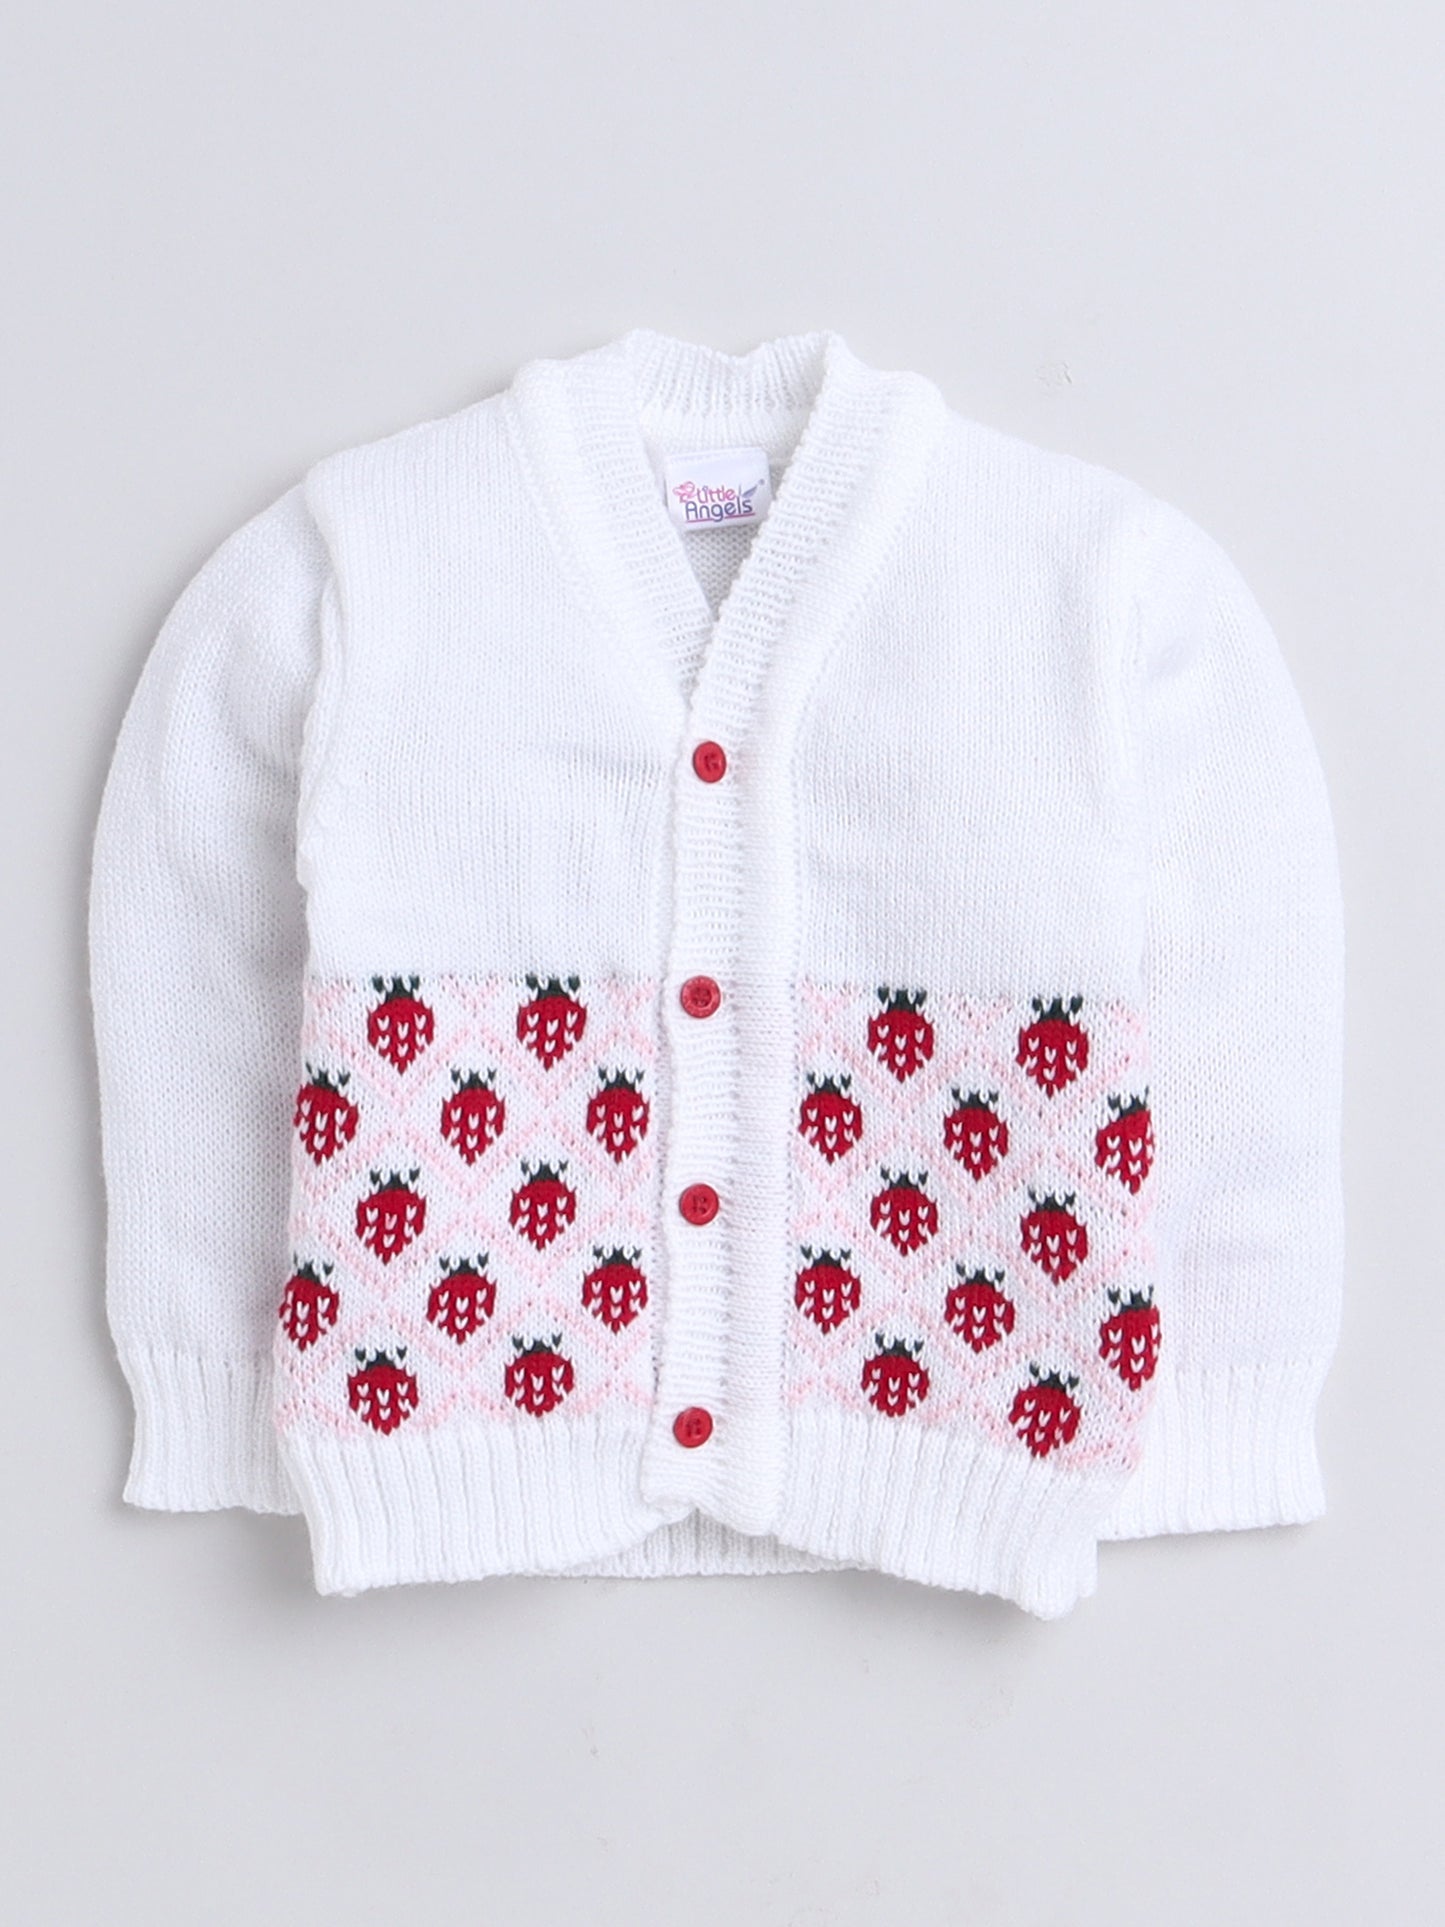 Little Angels Infant Strawberry Delight Knitted Sweater Set - Red and White, with Cap and Socks